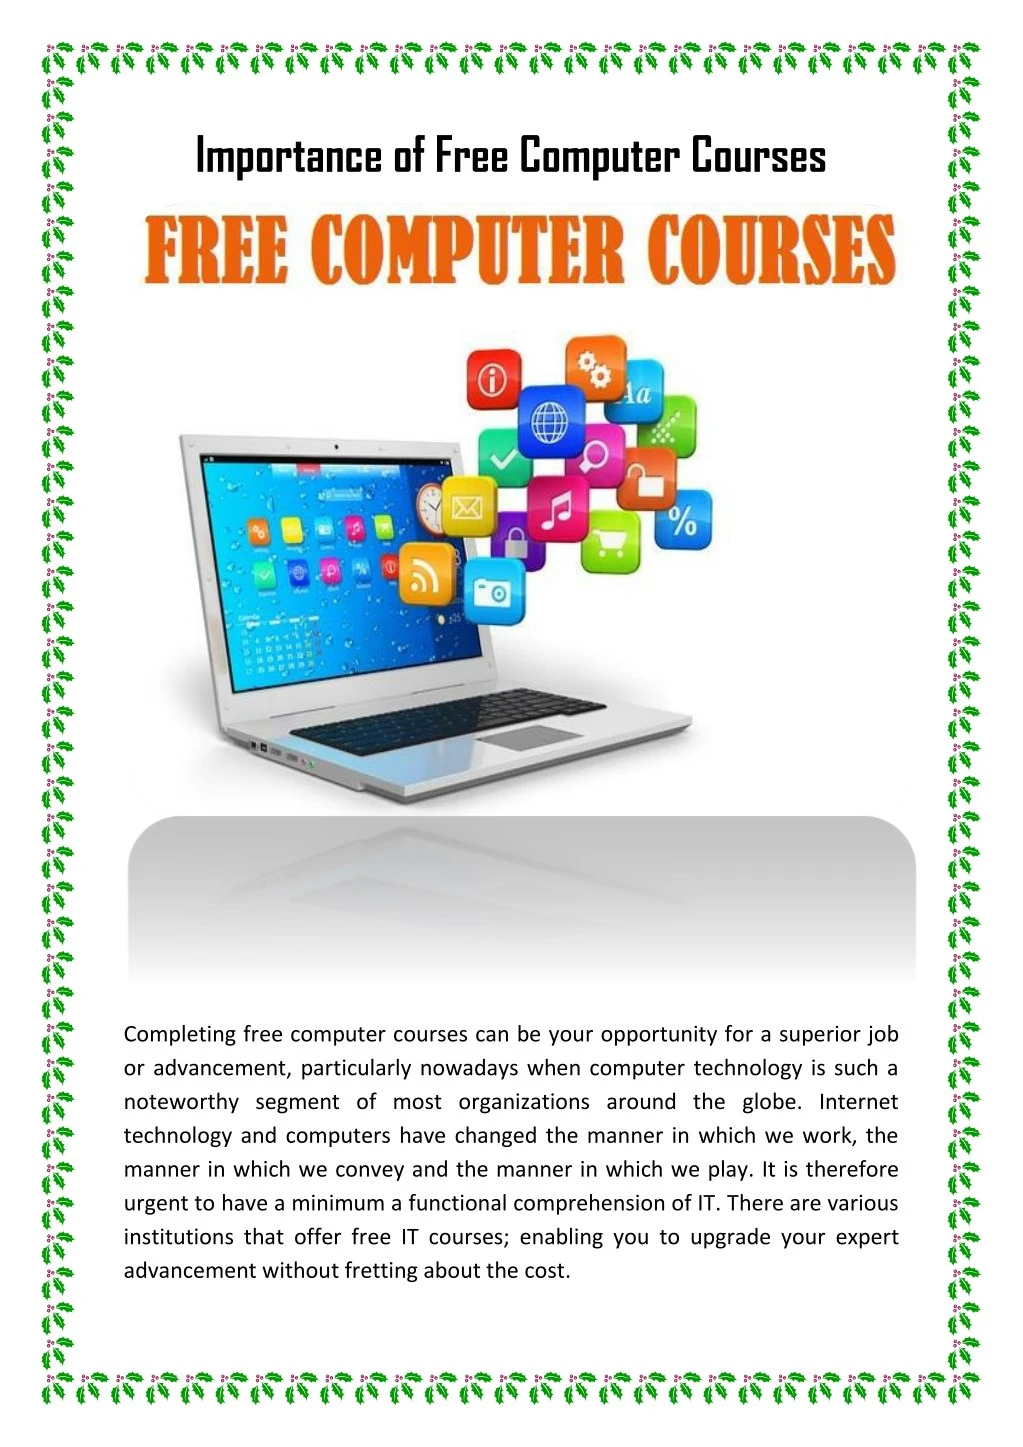 importance of free computer courses